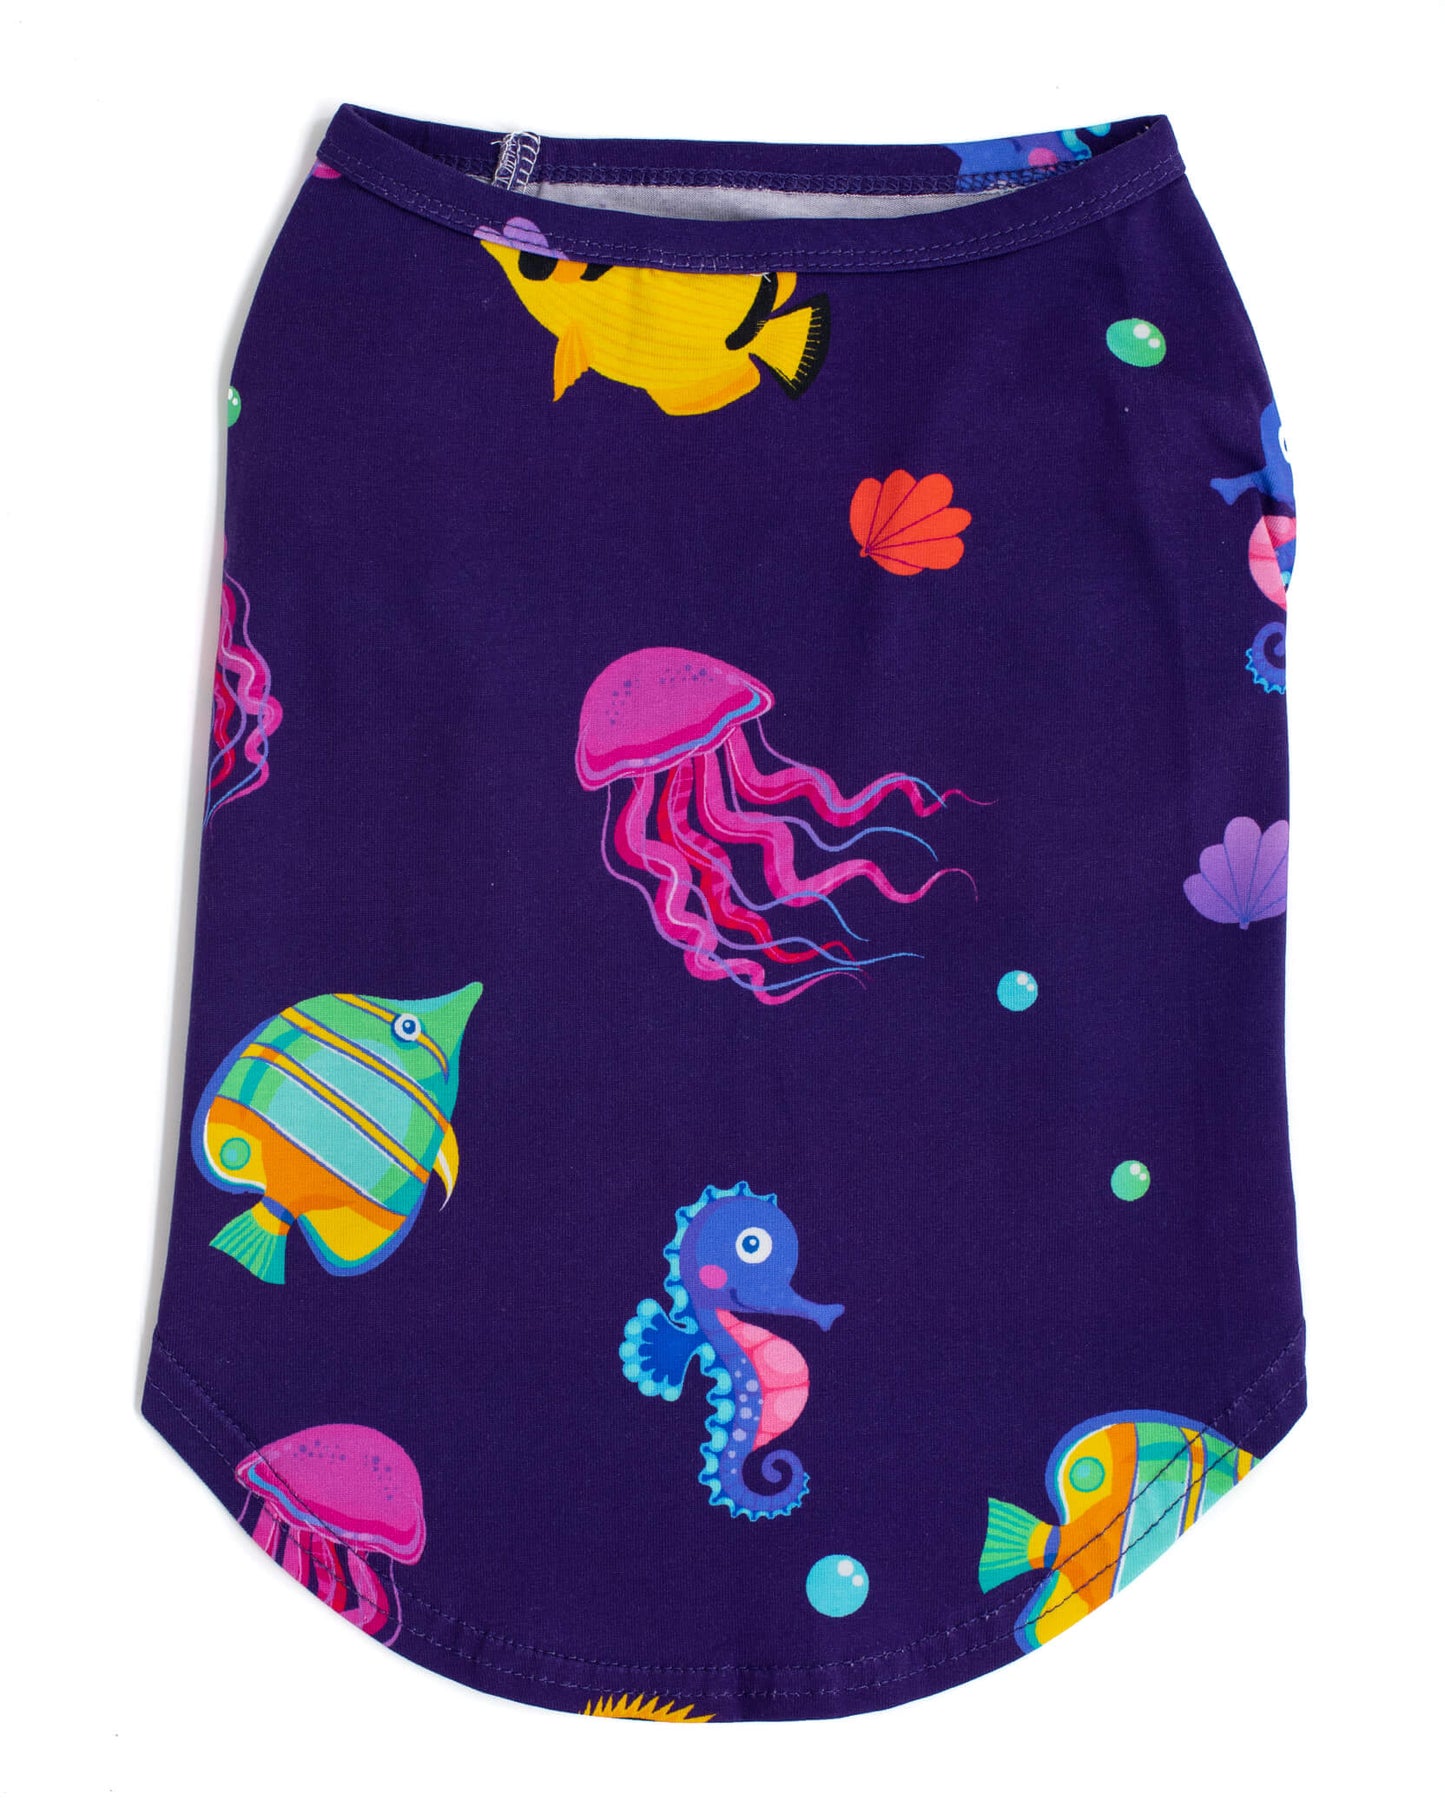 Vibrant Hound's "Magic Sea" shirt for dogs. A purple shirt with vibrant tropical fish printed on it, laid flat on a surface.